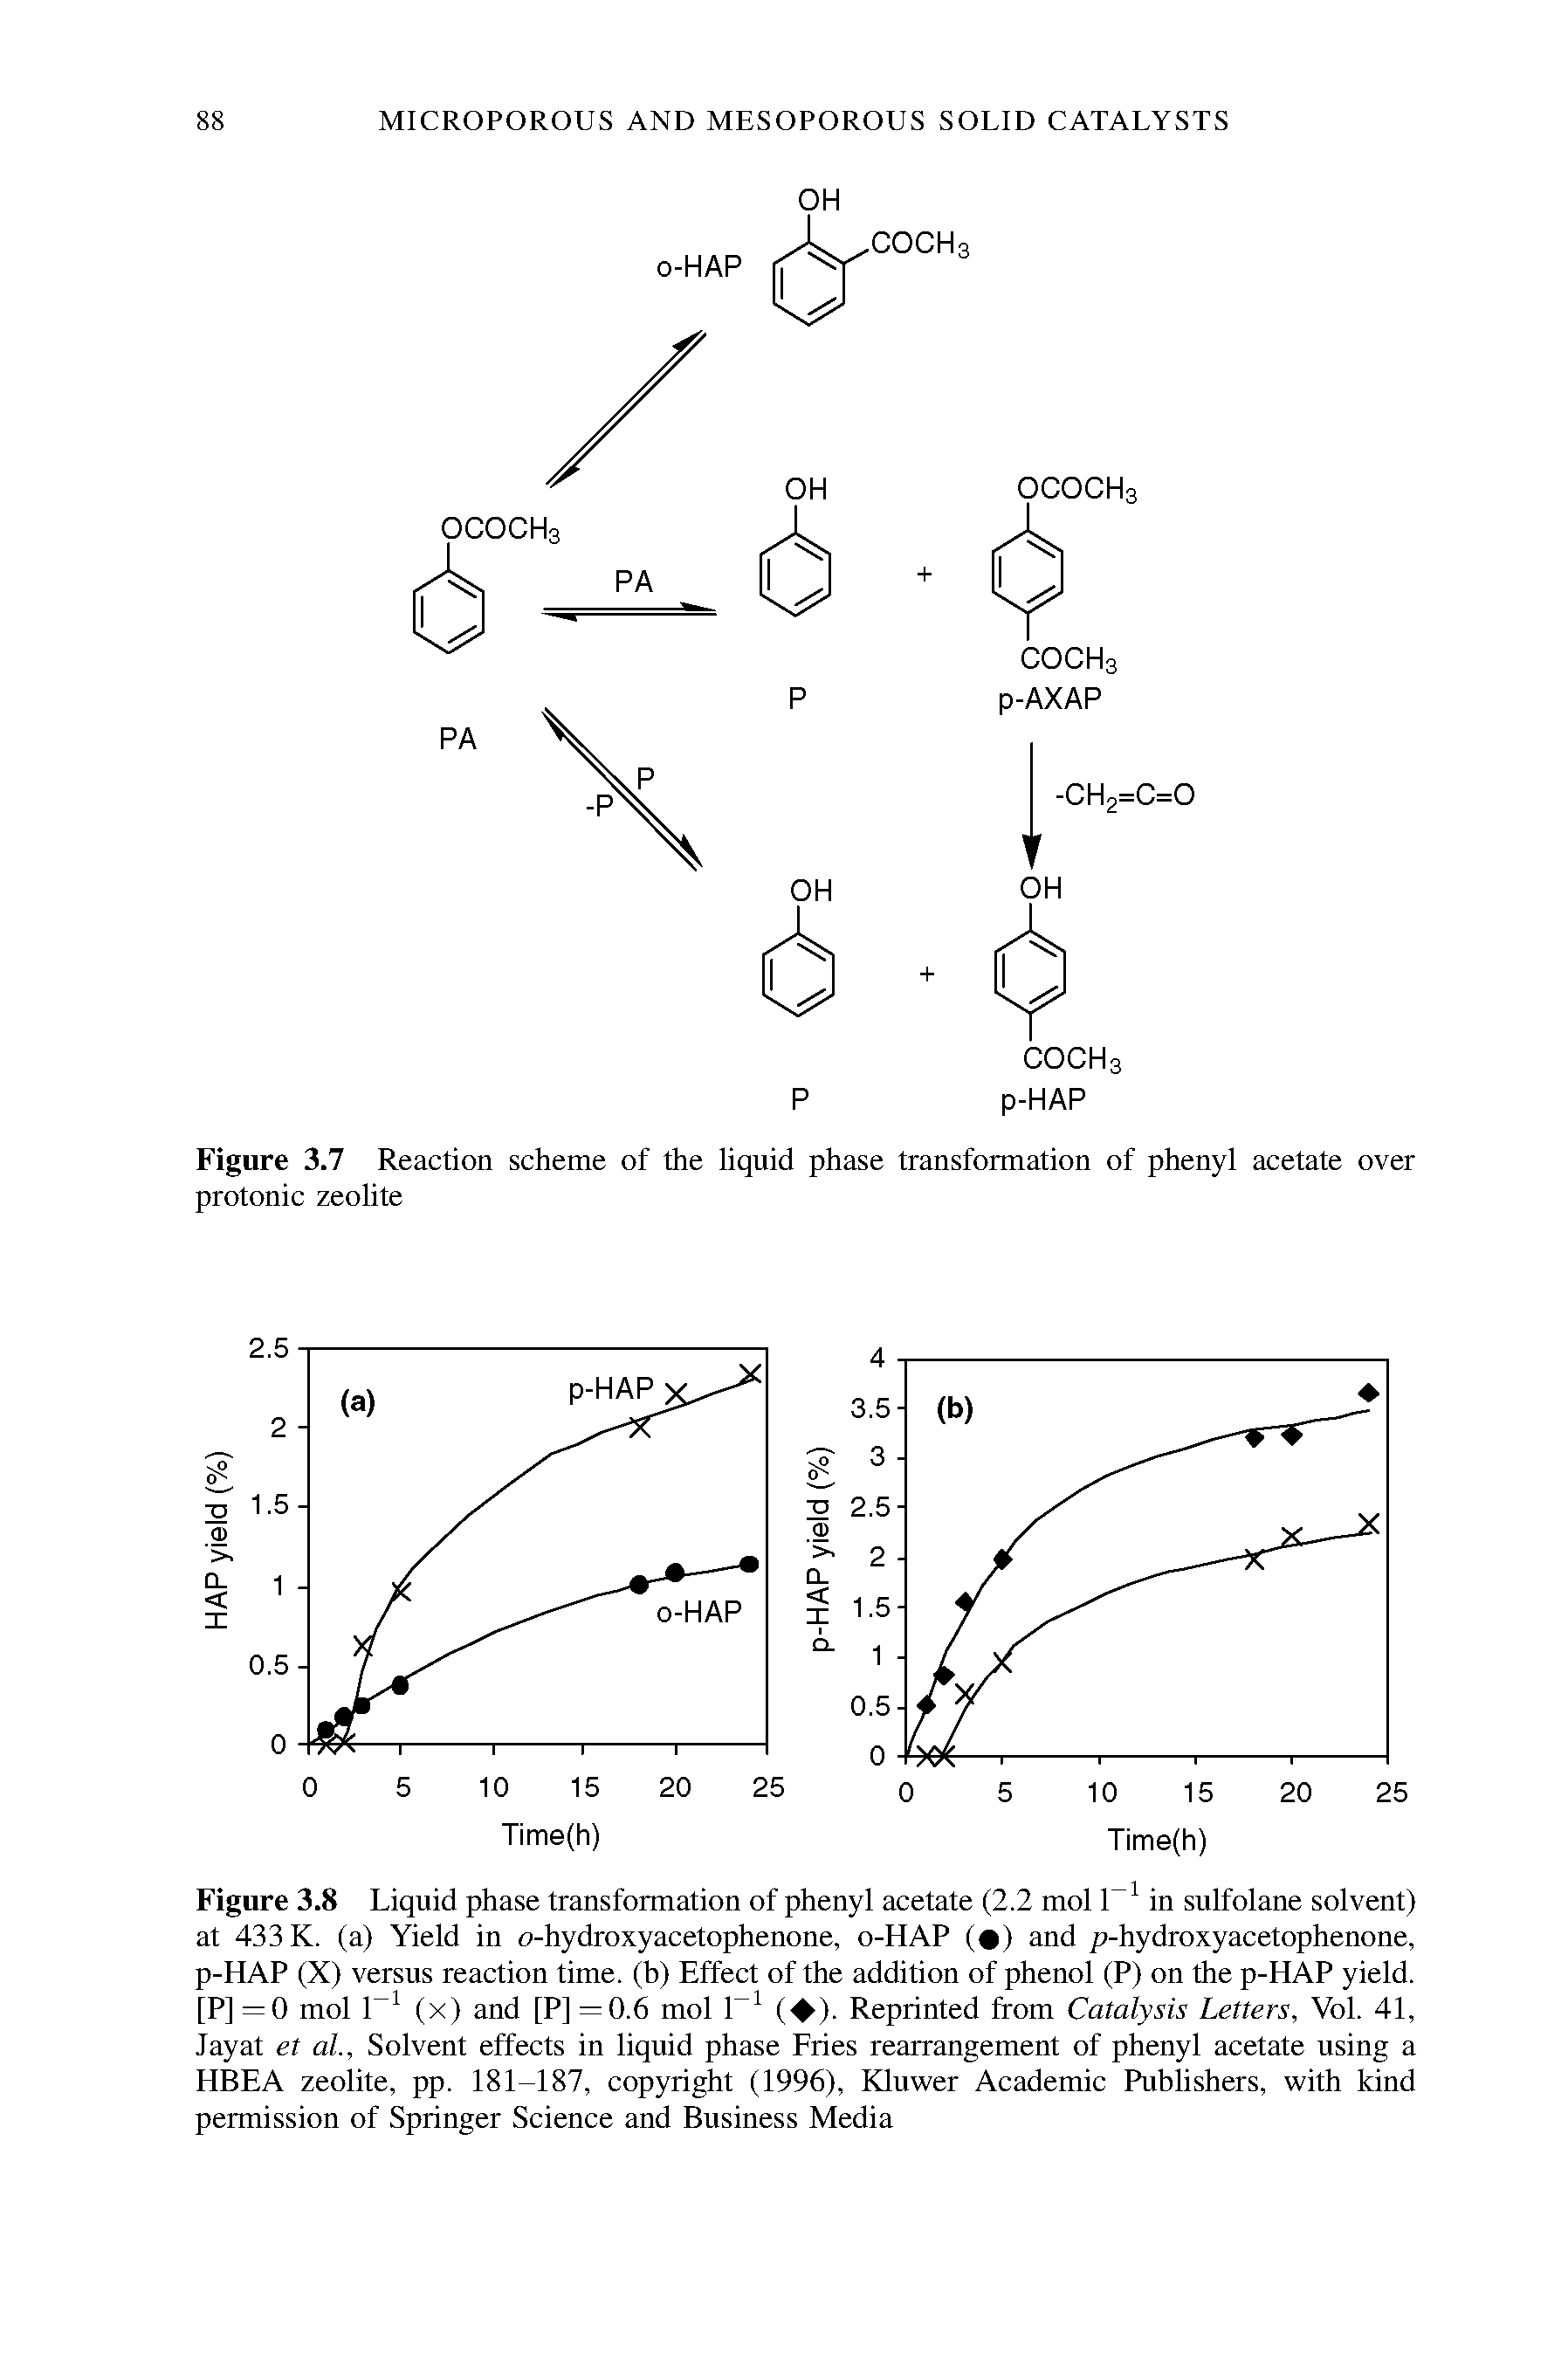 Figure 3.8 Liquid phase transformation of phenyl acetate (2.2 mol l-1 in sulfolane solvent) at 433 K. (a) Yield in o-hydroxyacetophenone, o-HAP ( ) and p-hydroxyacetophenone, p-HAP (X) versus reaction time, (b) Effect of the addition of phenol (P) on the p-HAP yield. [P] =0 mol l-1 (x) and [P] =0.6 mol l-1 ( ). Reprinted from Catalysis Letters, Vol. 41, Jayat et al., Solvent effects in liquid phase Fries rearrangement of phenyl acetate using a HBEA zeolite, pp. 181-187, copyright (1996), Kluwer Academic Publishers, with kind permission of Springer Science and Business Media...